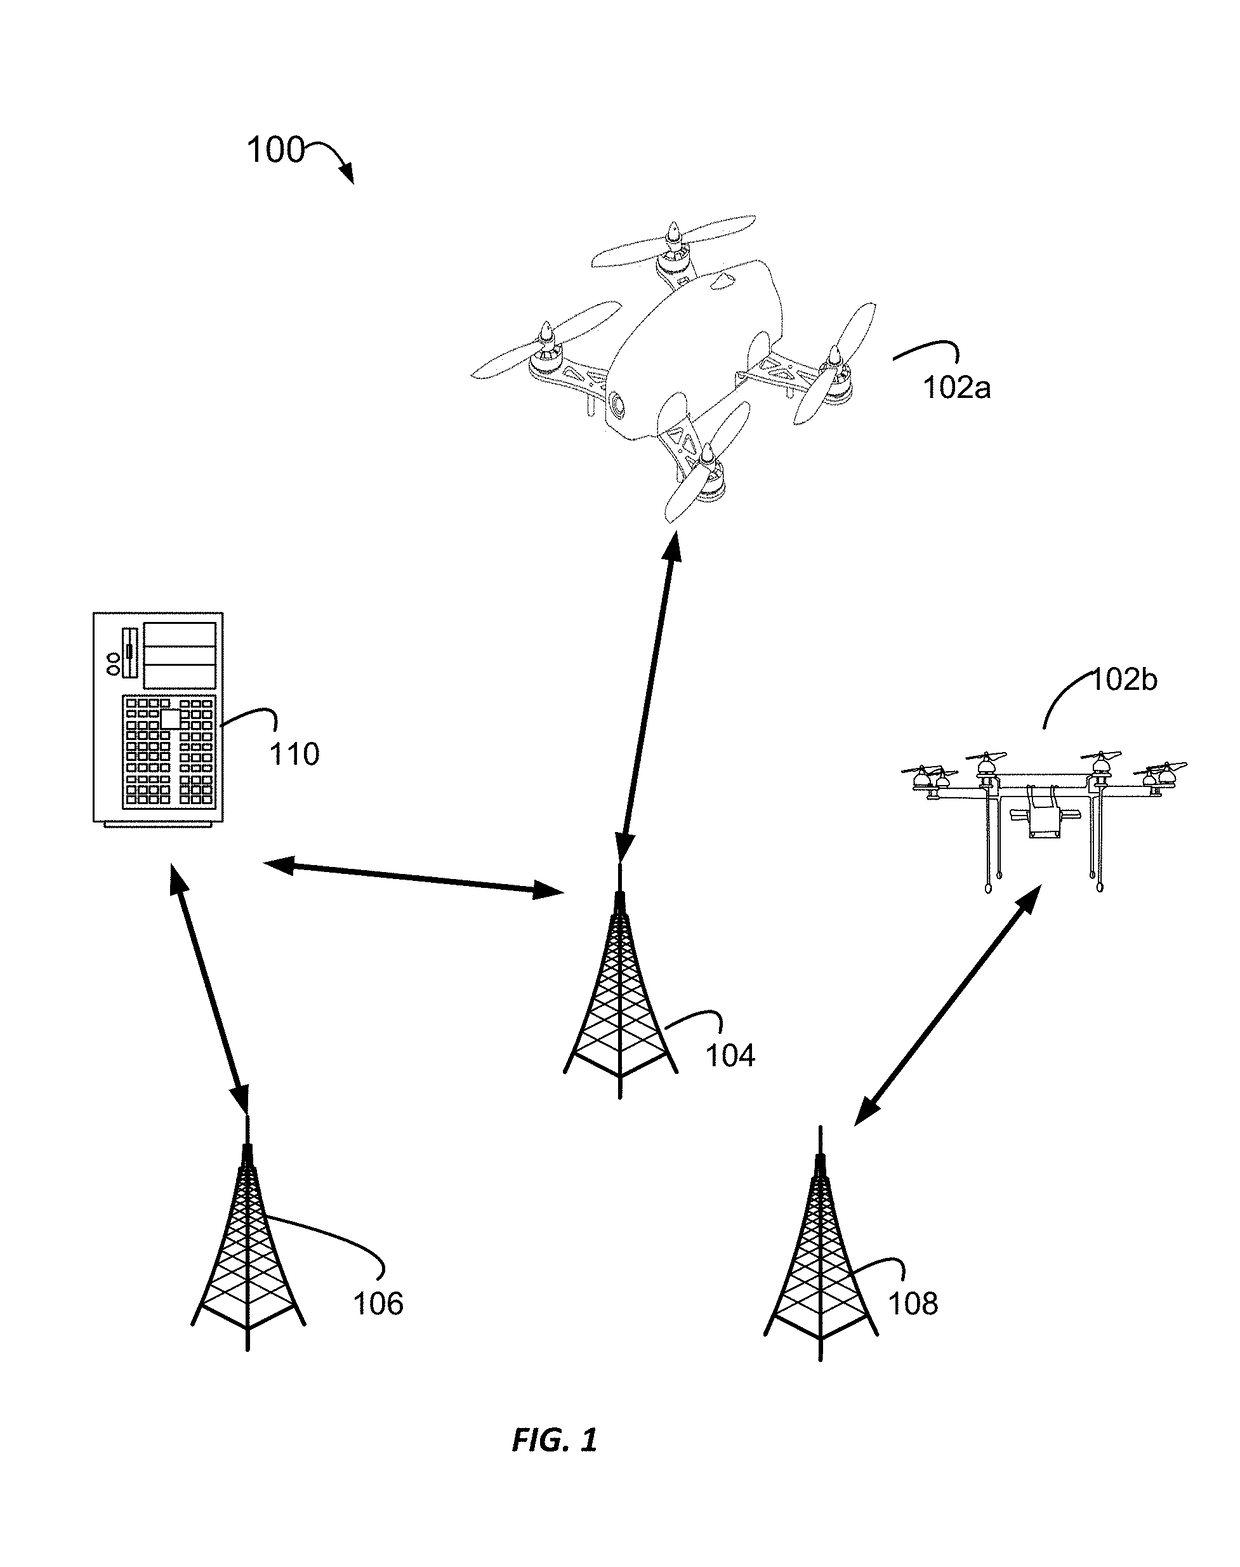 Navigation assistance data and route planning for drones